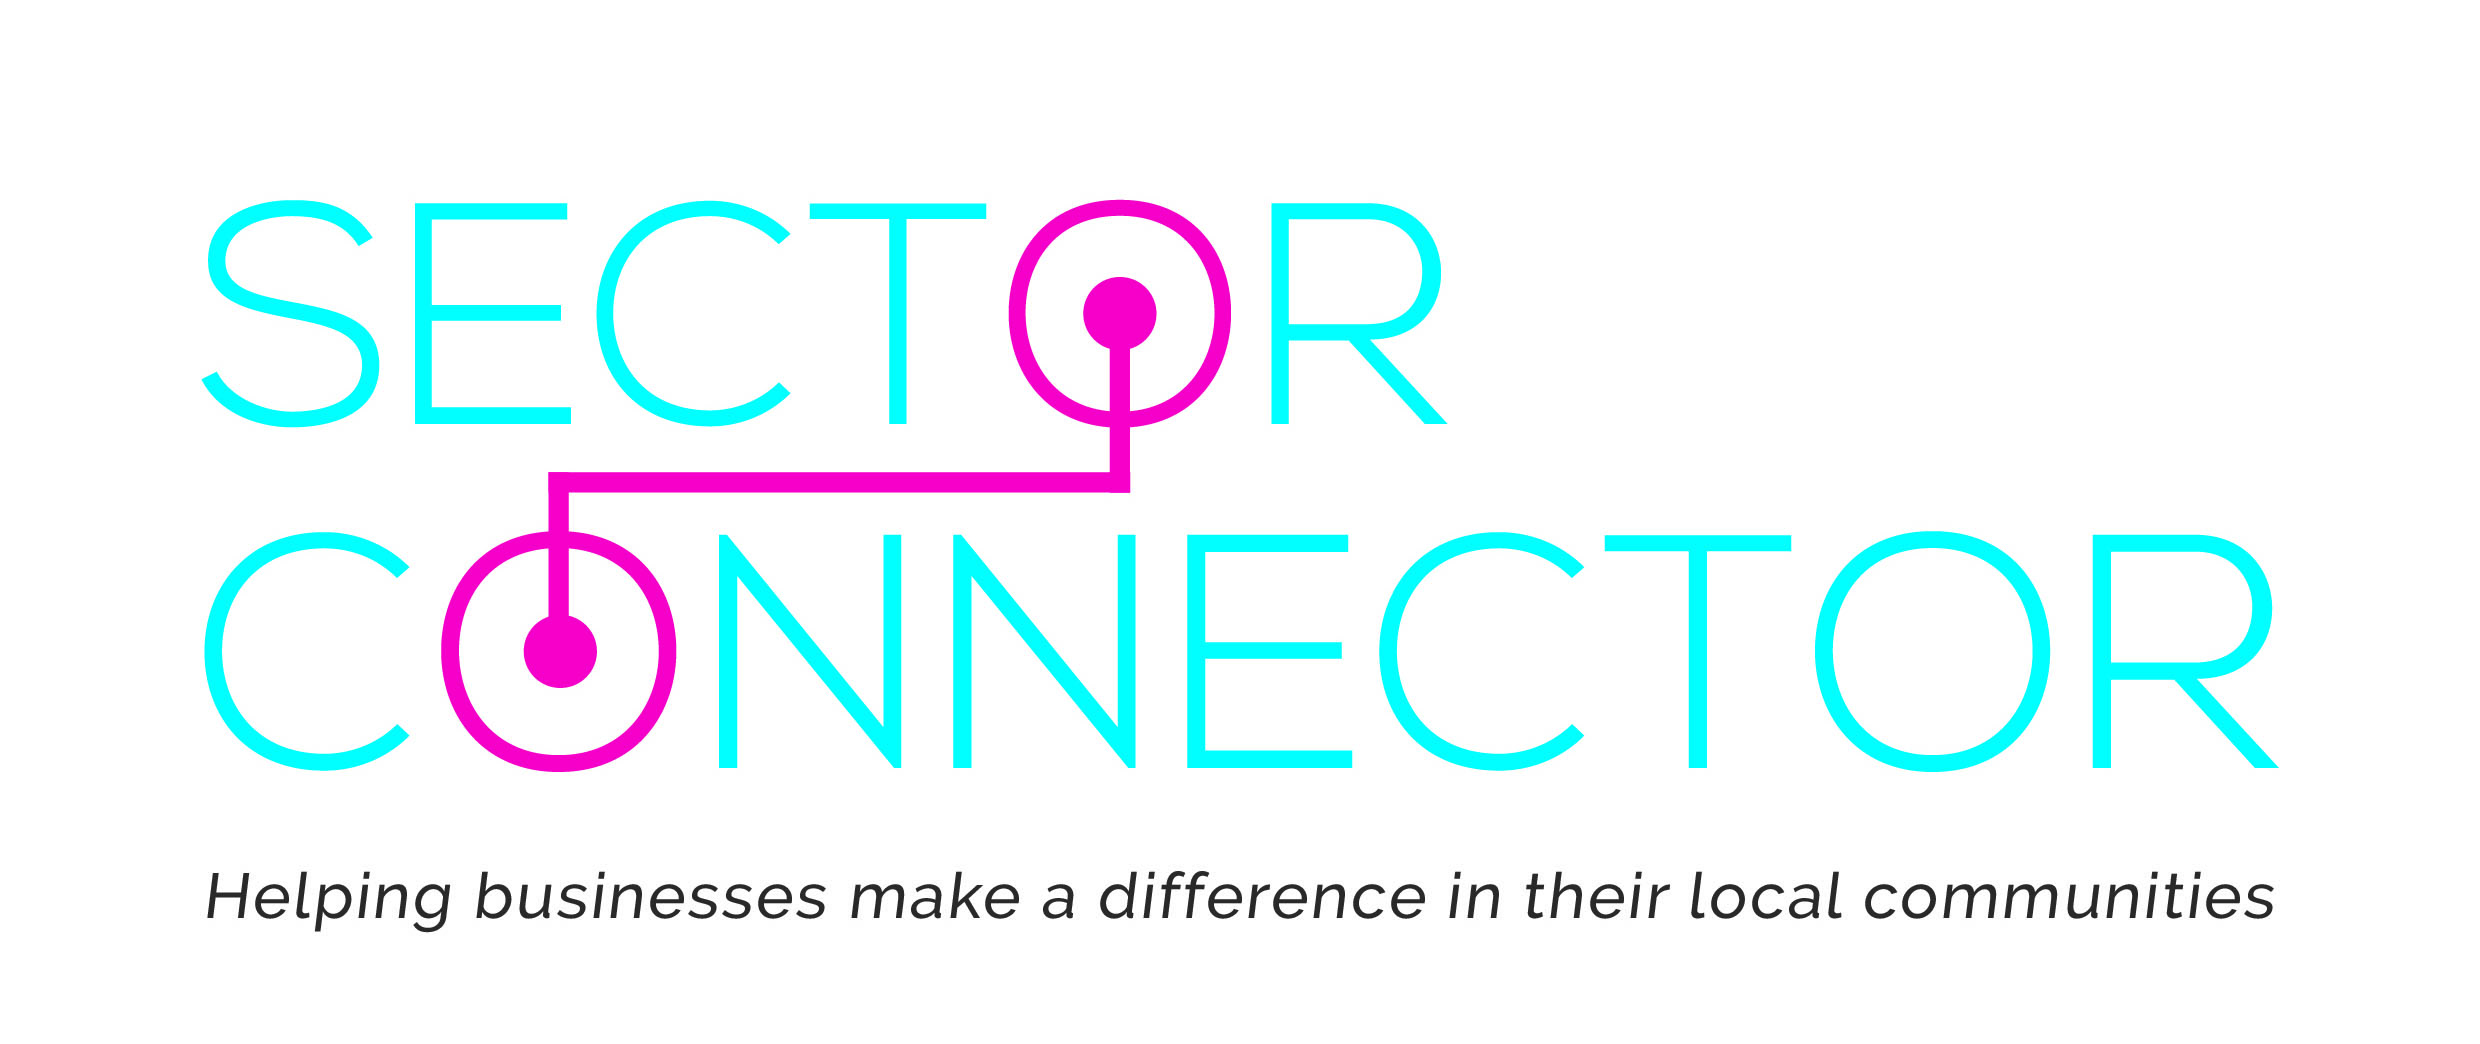 Connected Voice Sector Connector logo